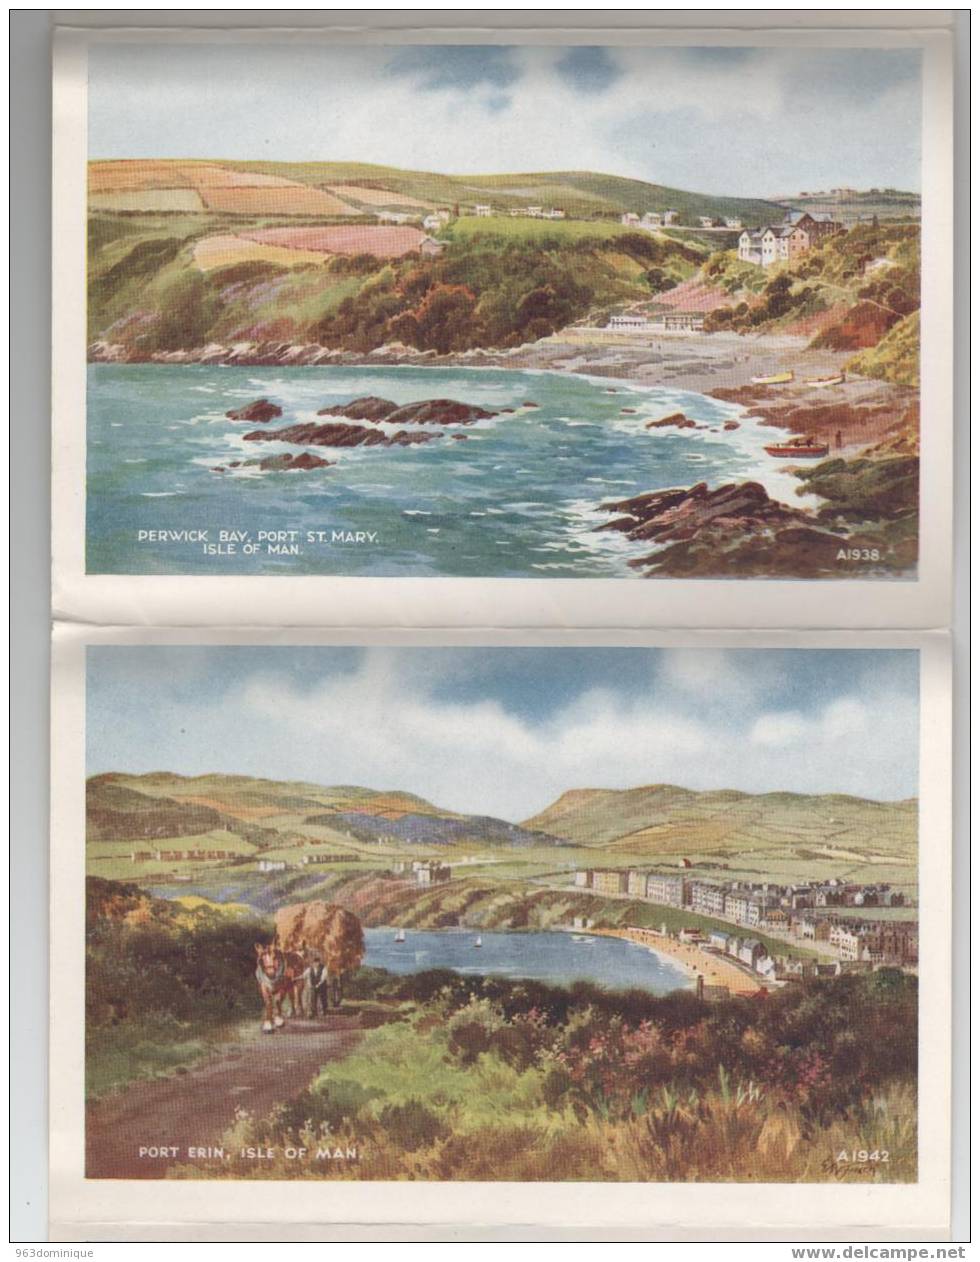 Isle Of Man - 6 View Letter Card Of Picturesque Manxland - Isle Of Man, Castletown - Isle Of Man